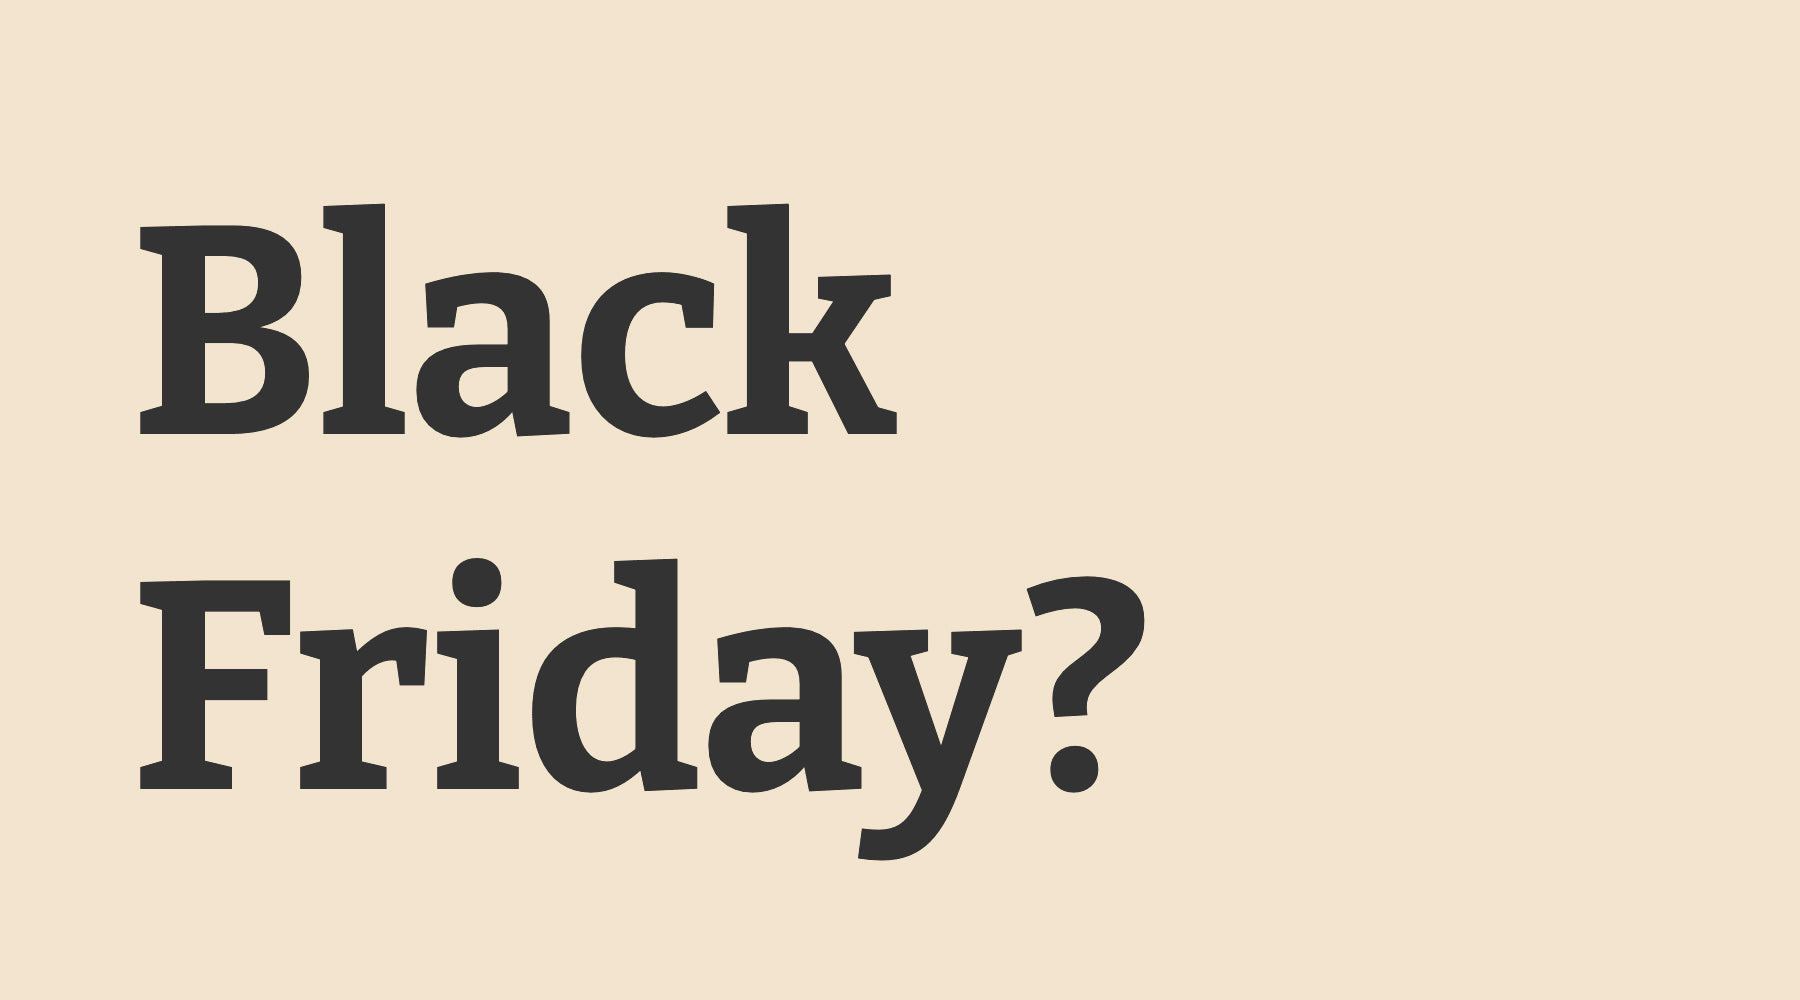 Can you buy ethically during Black Friday?